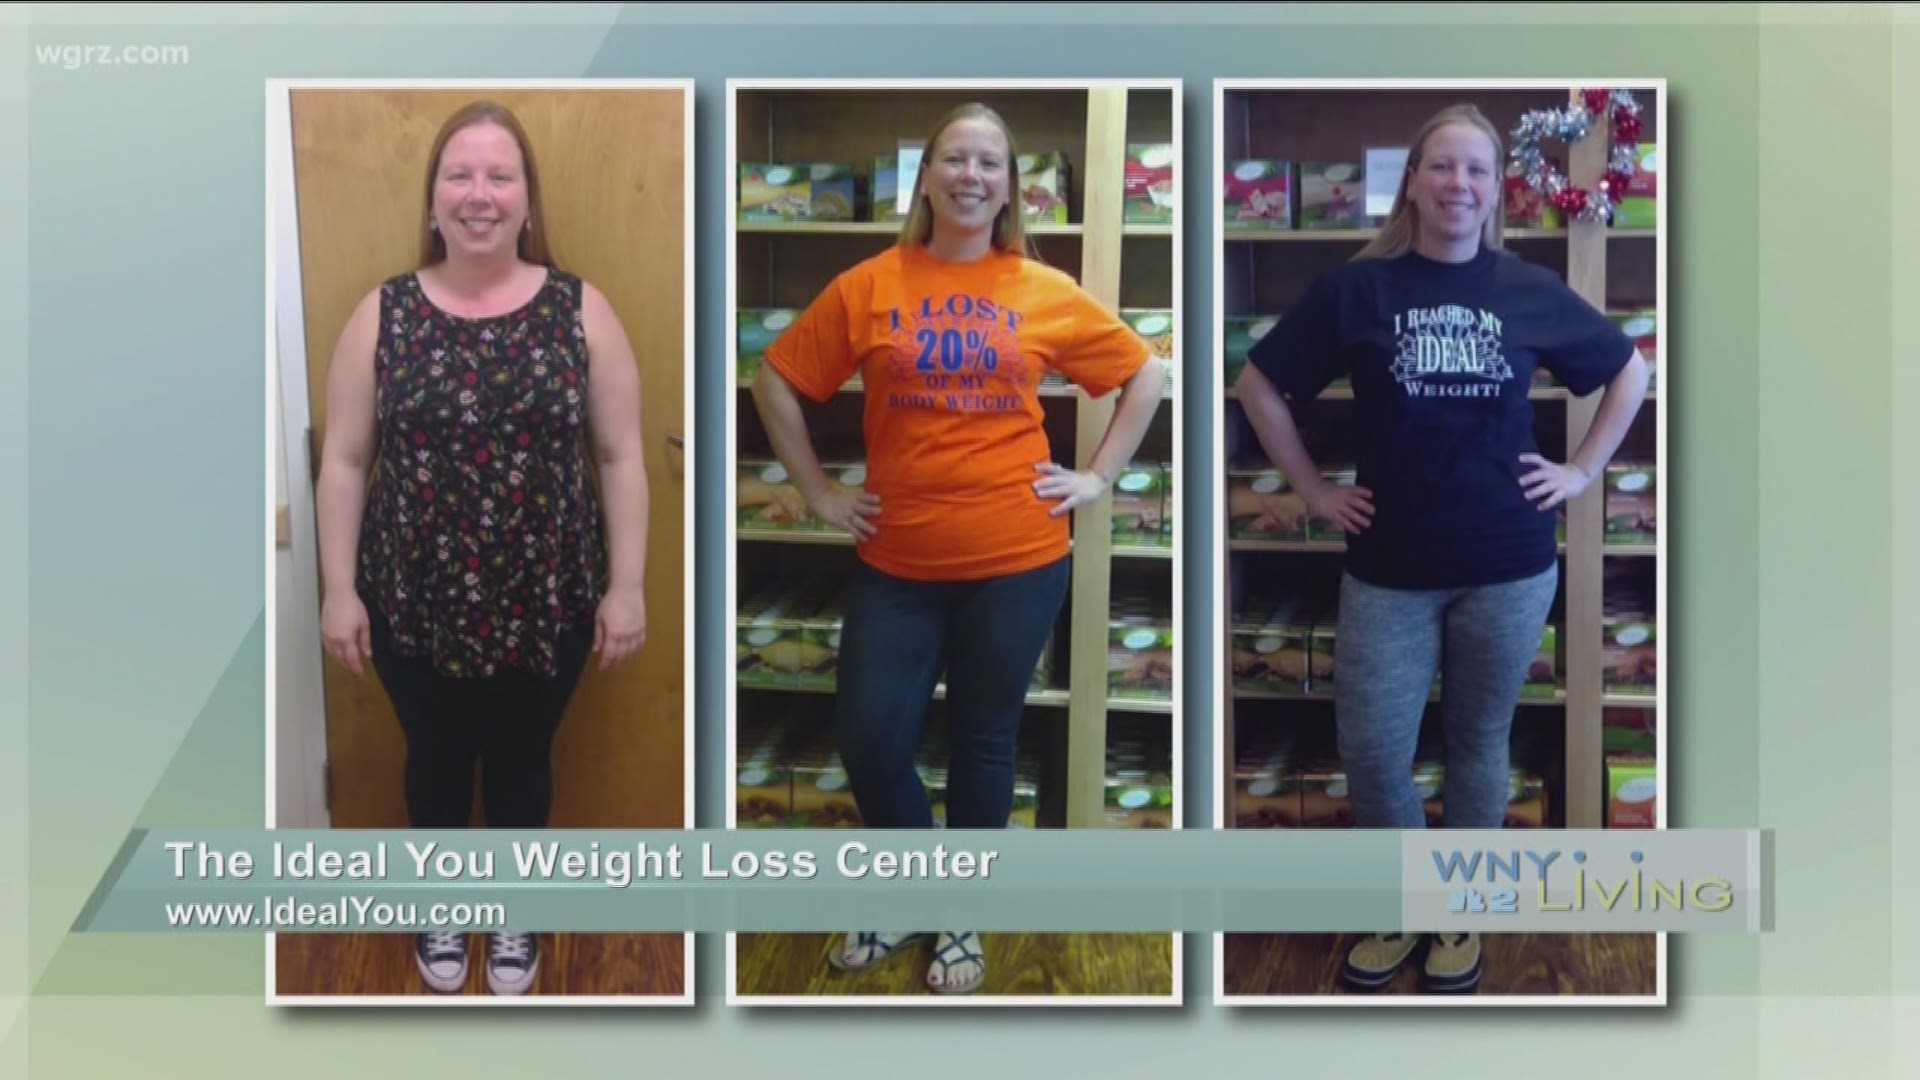 WNY Living - April 20 - The Ideal You Weight Loss Center (SPONSORED CONTENT)